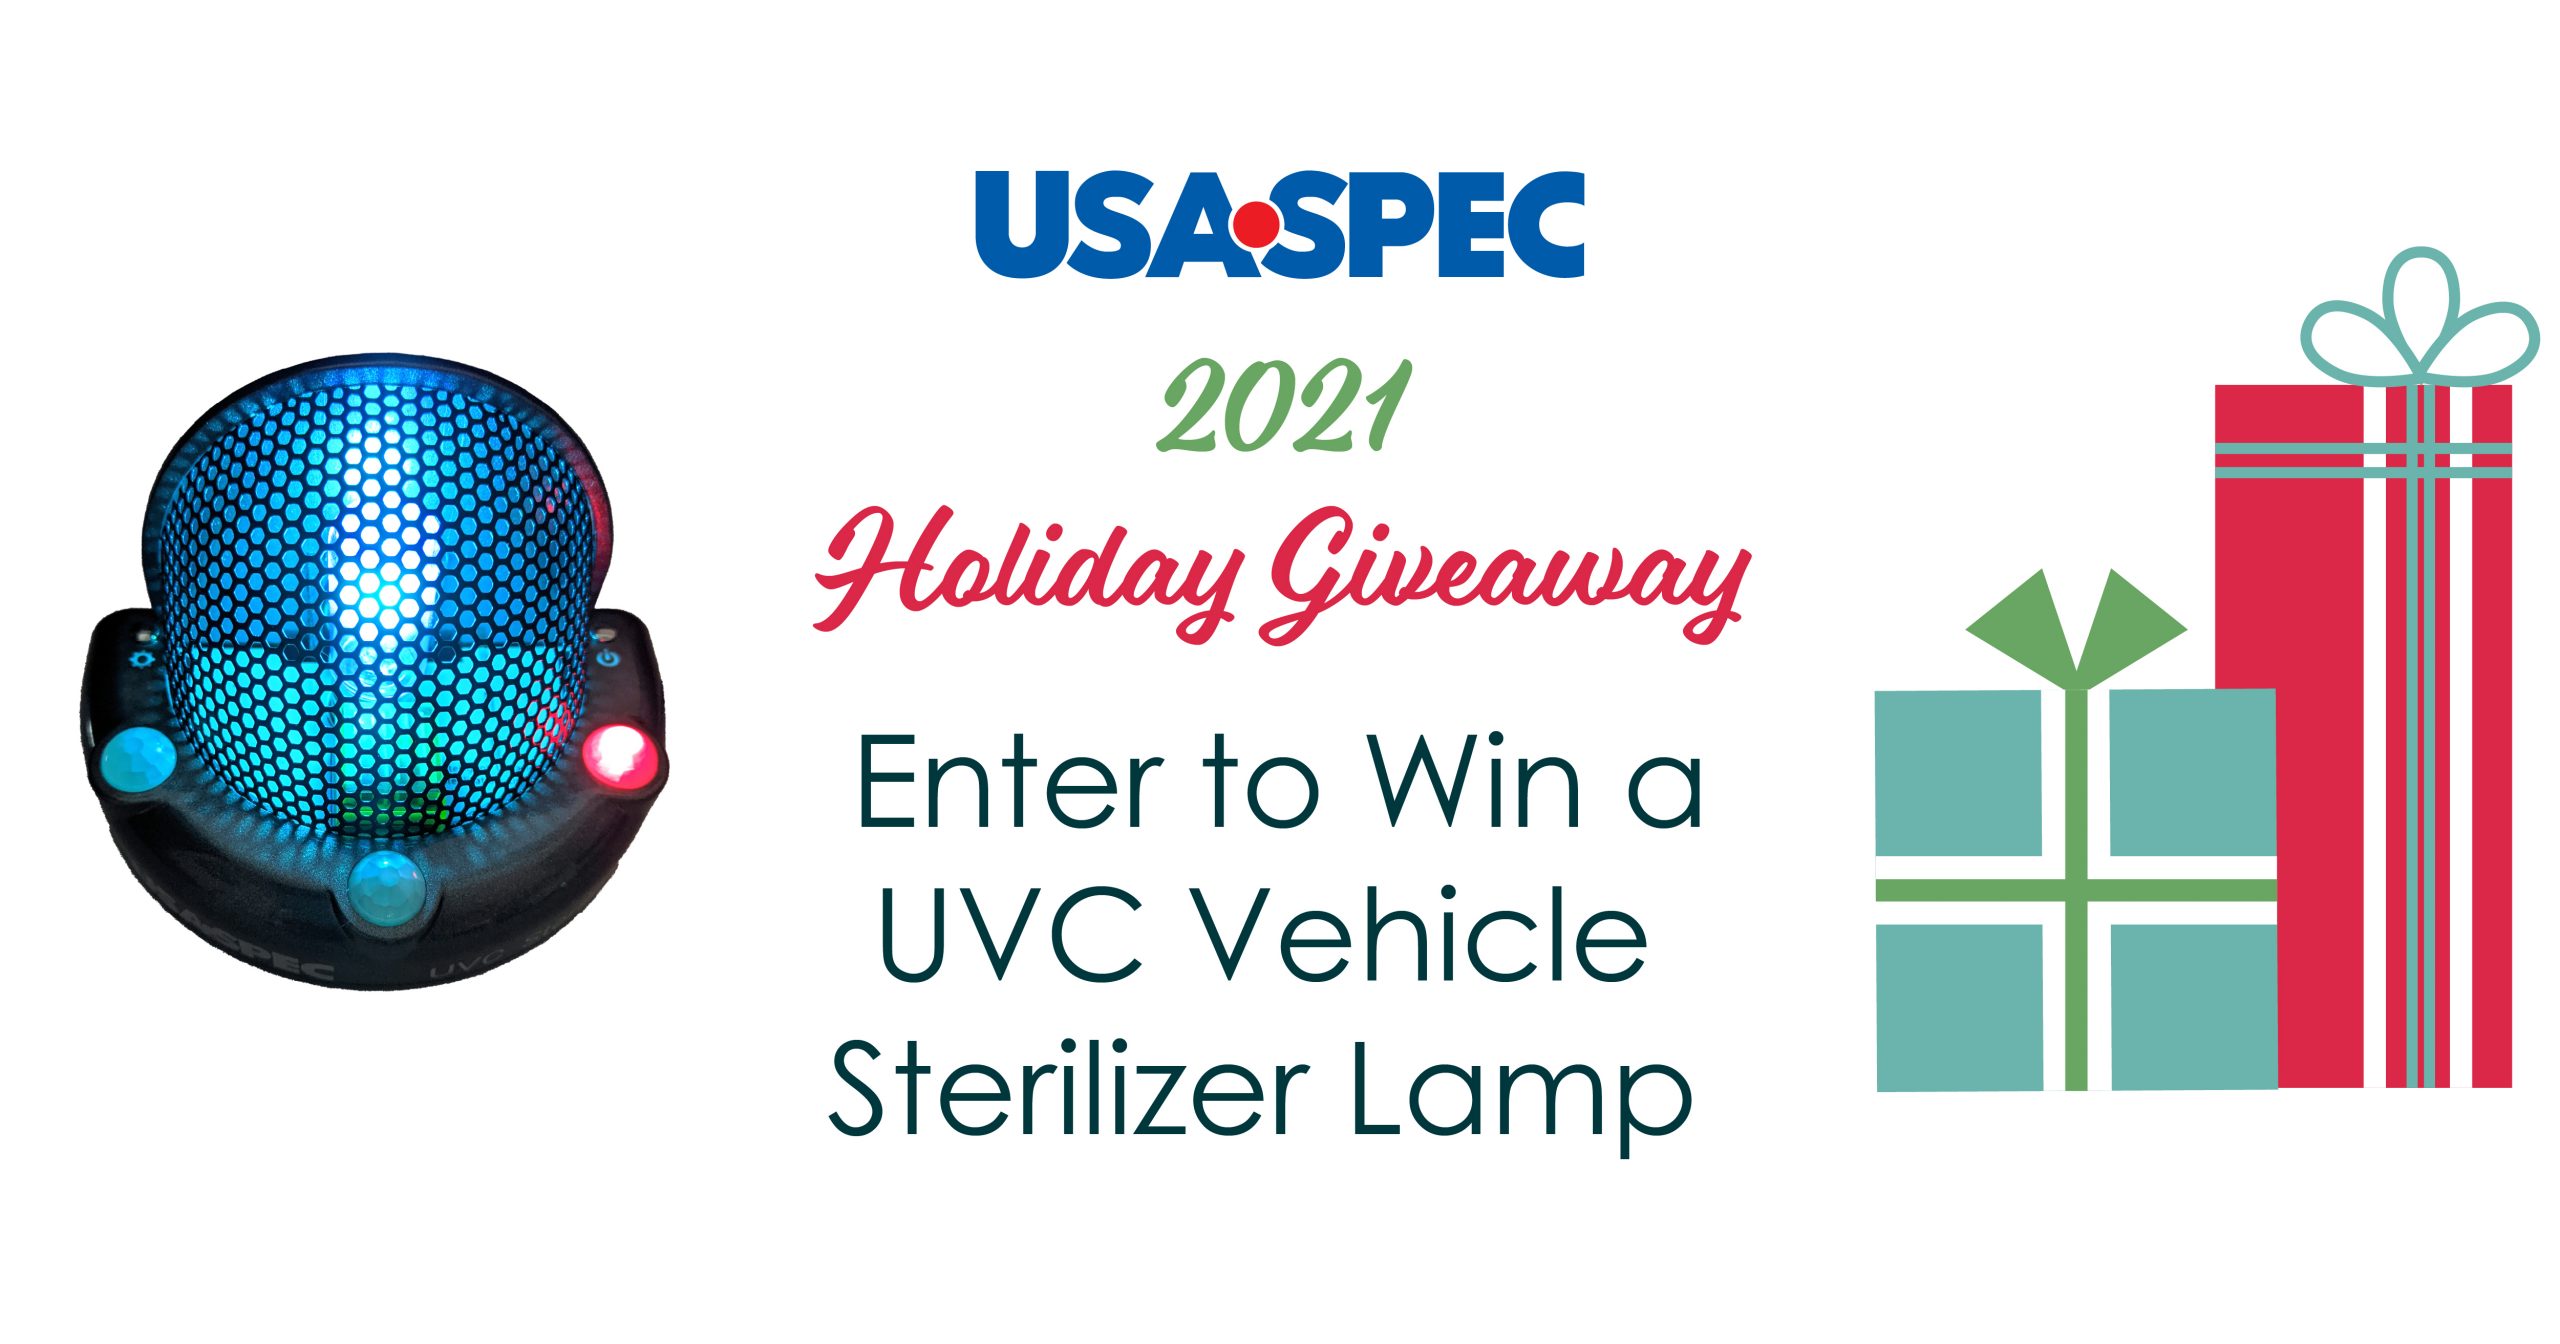 UVC sterilizer lamp for cars Giveaway